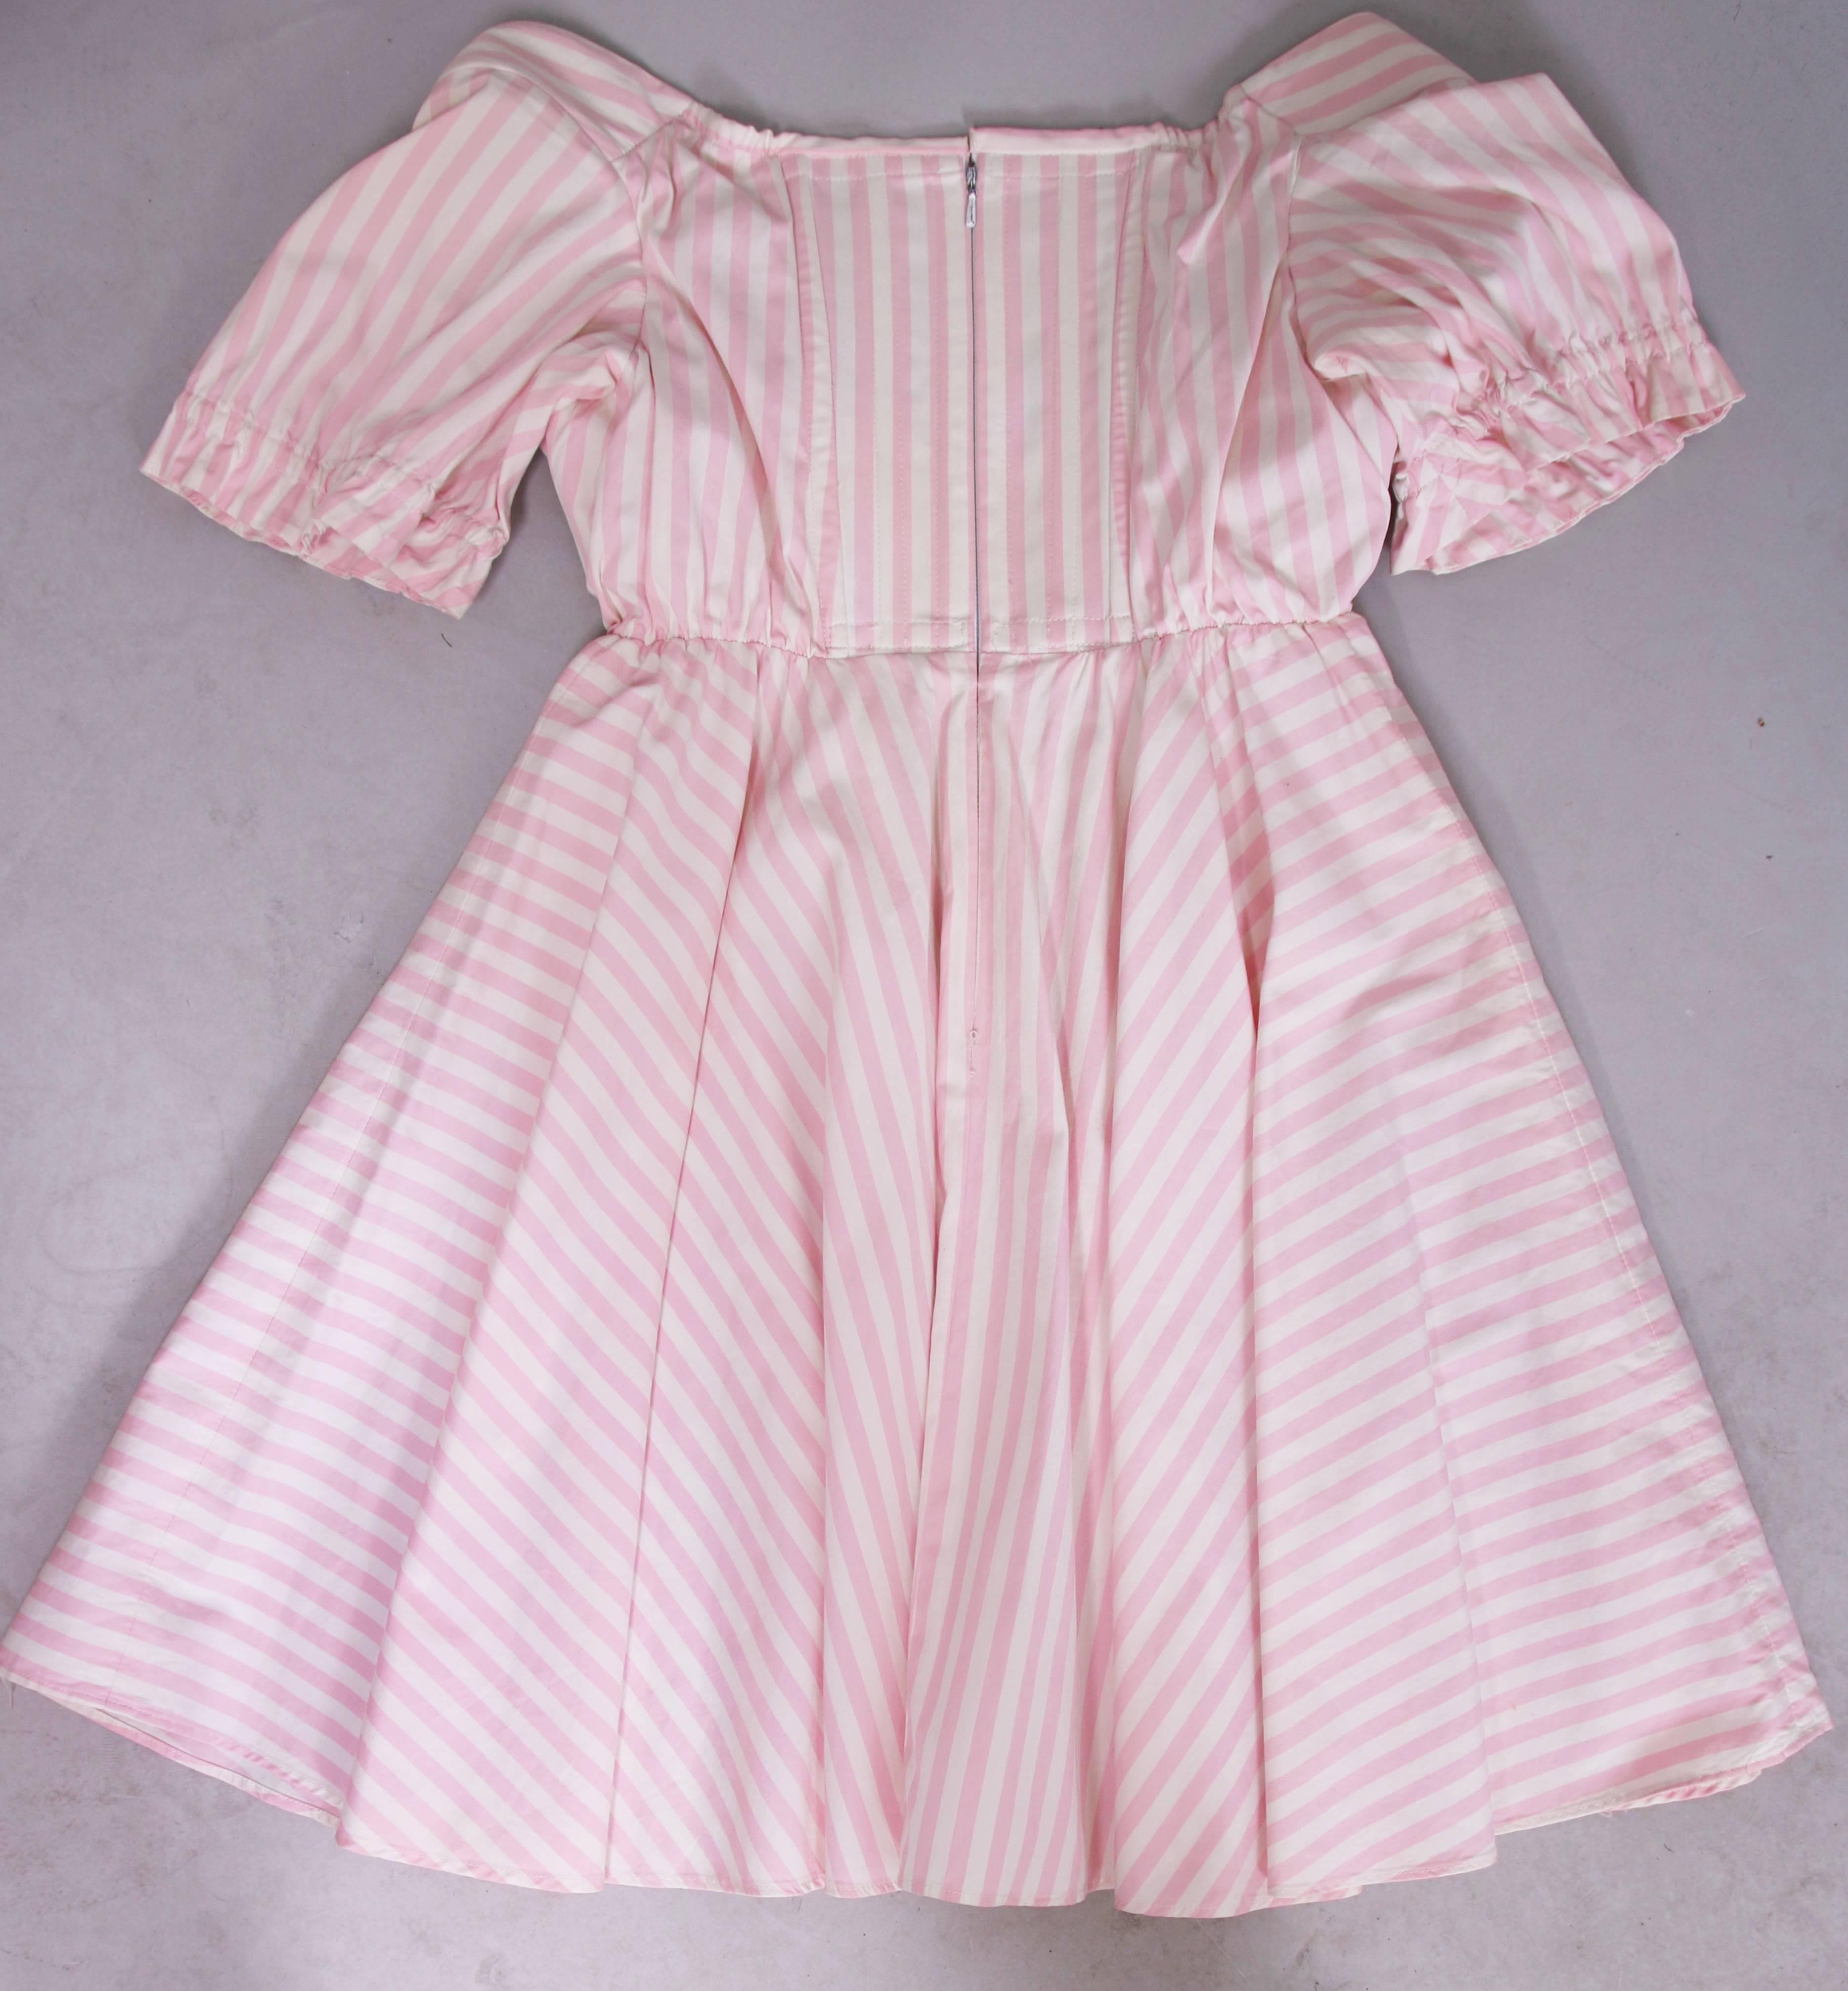 pink and white babydoll dress